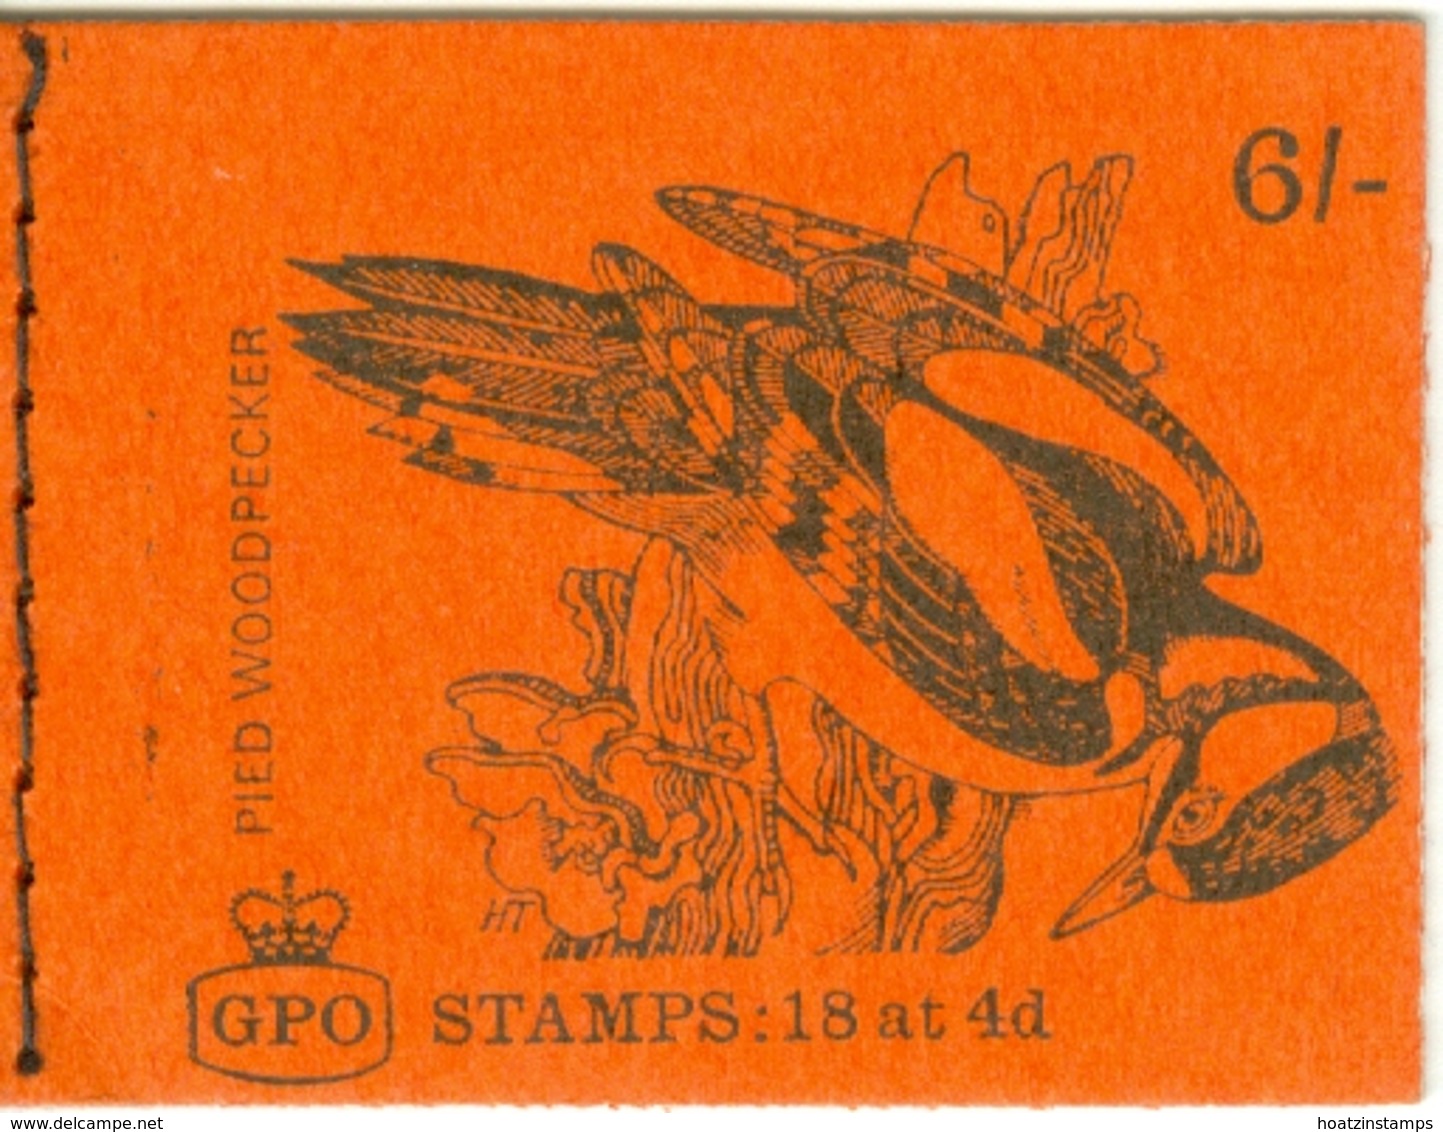 G.B. Booklets: 1968:   Pied Woodpecker 6/- (Oct 68) Booklet   SG QP42    Unused - Libretti